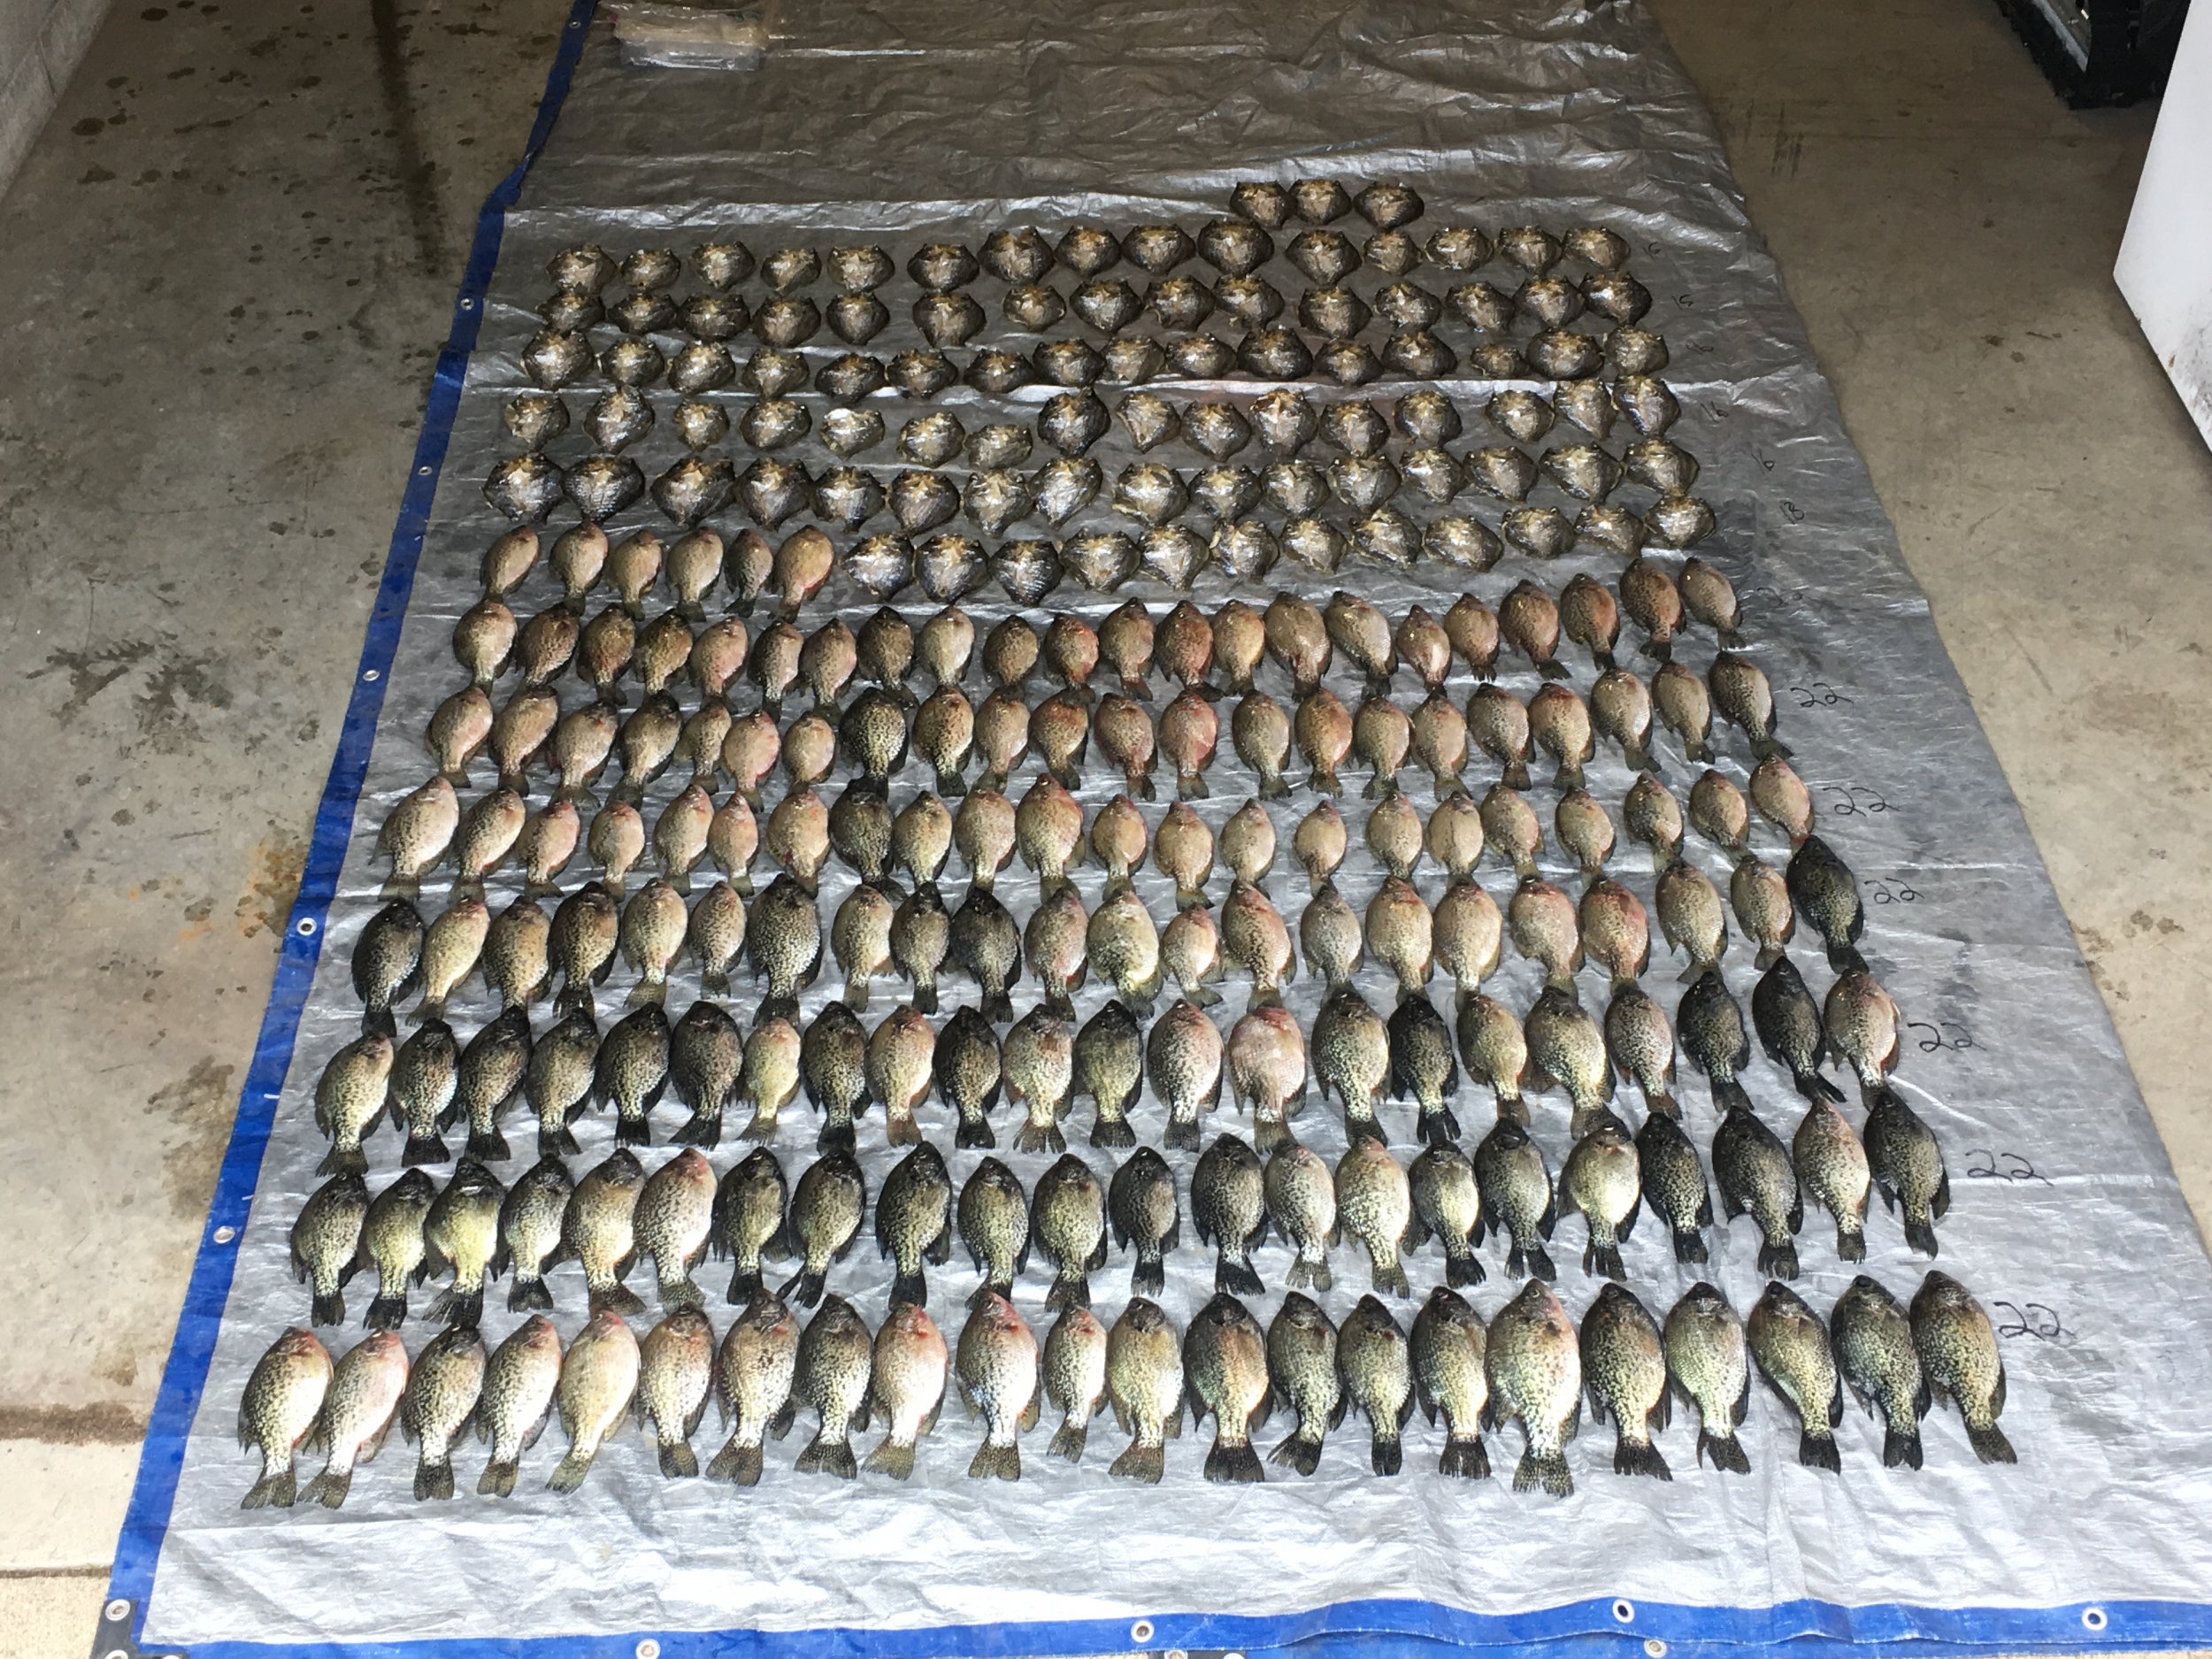 Minnesota Couple Nabbed For Hauling In More Than 250 Crappie Fish Over